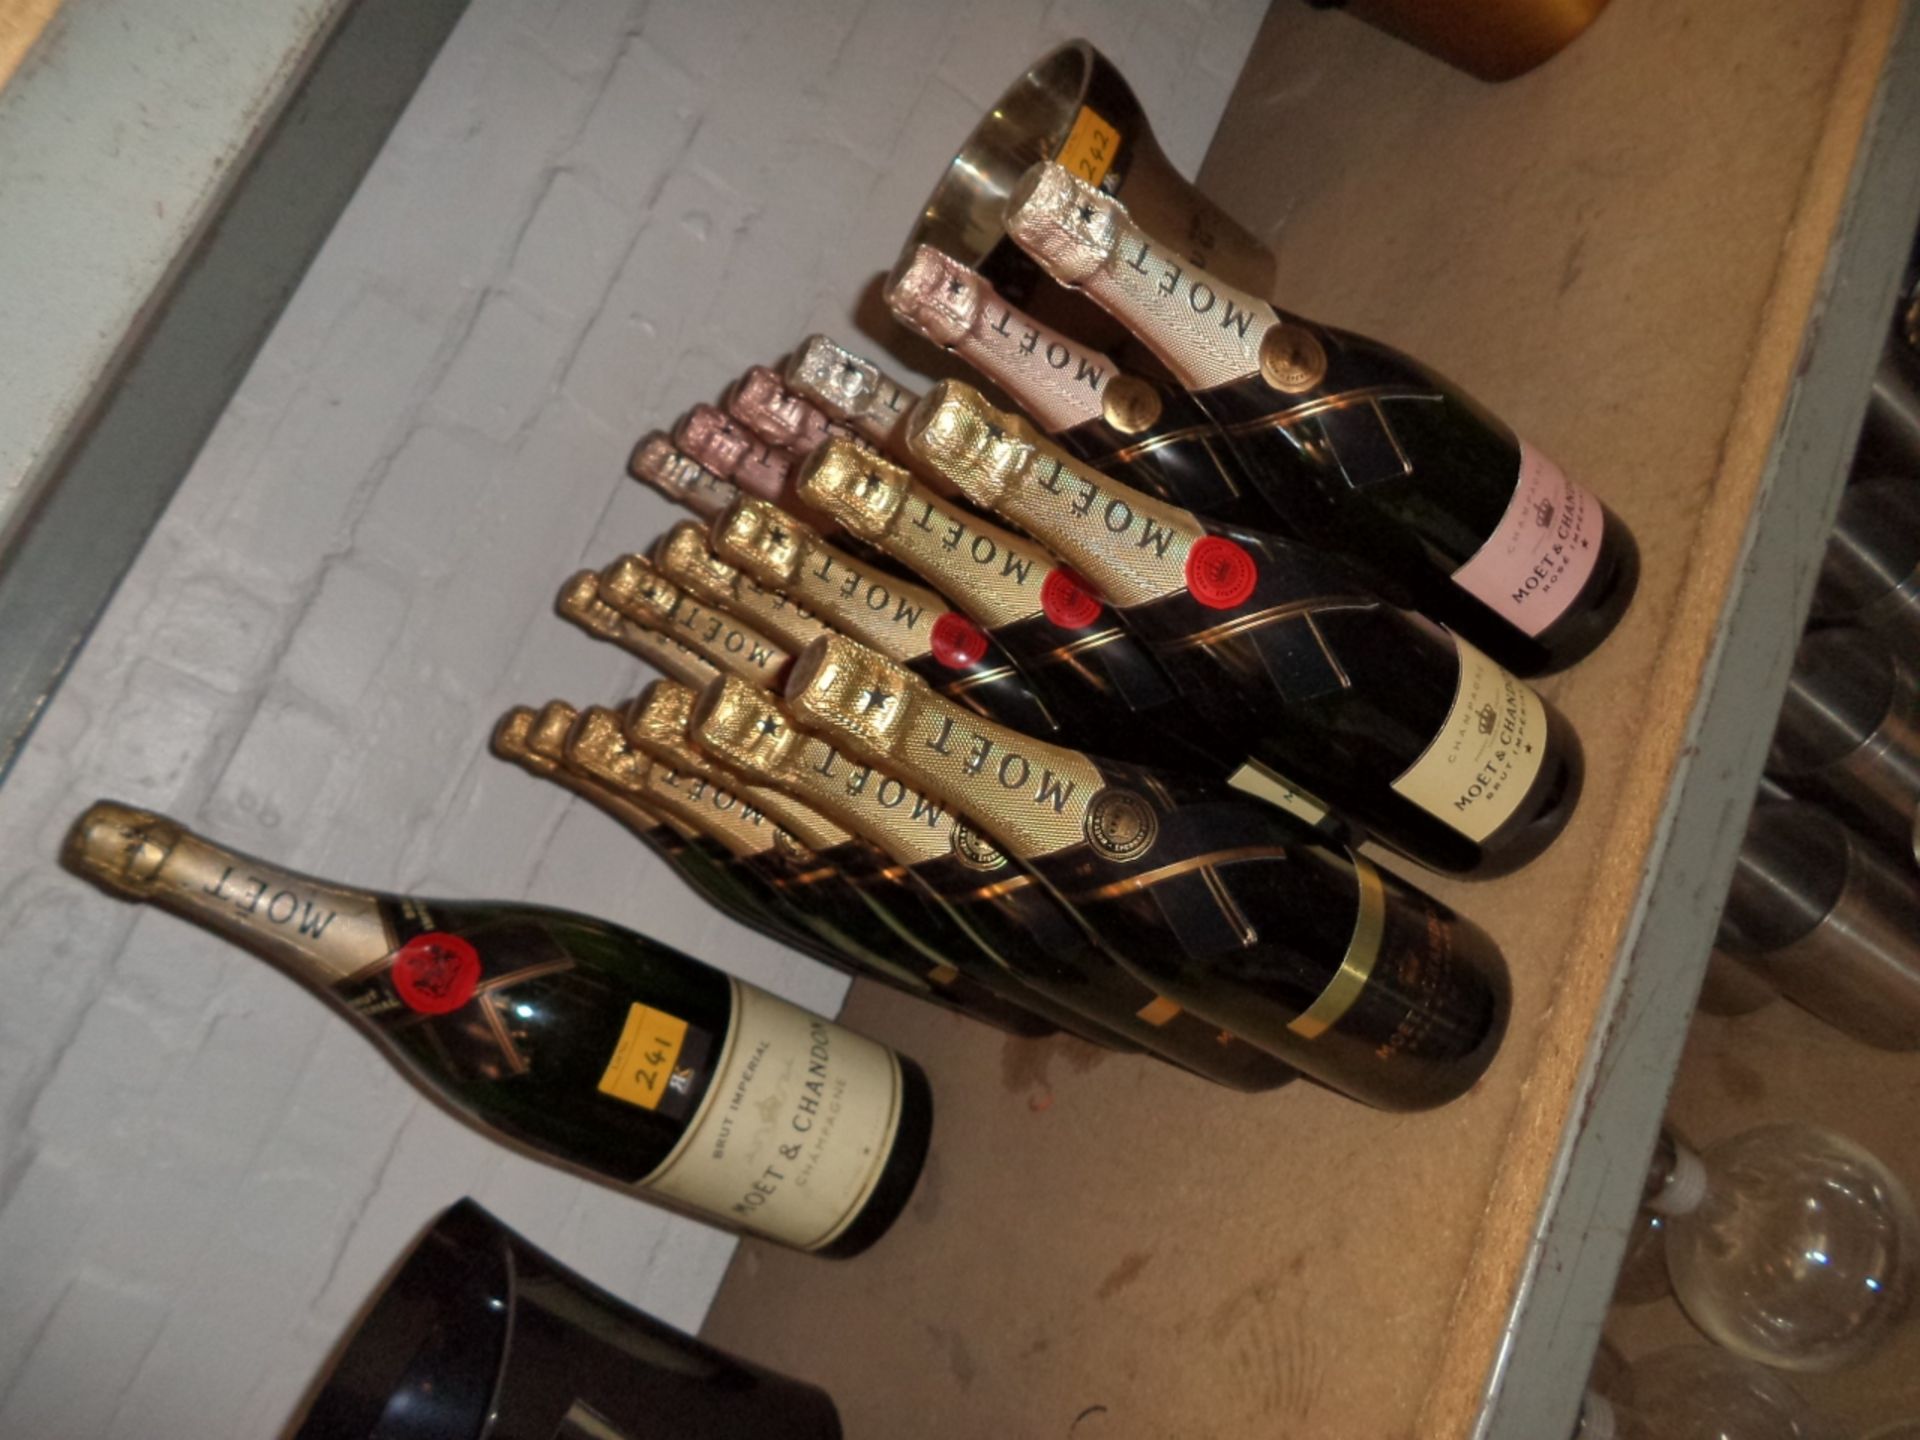 19 off Moet & Chandon Champagne dummy display bottles, including both white and rose non-vintage, - Image 2 of 4